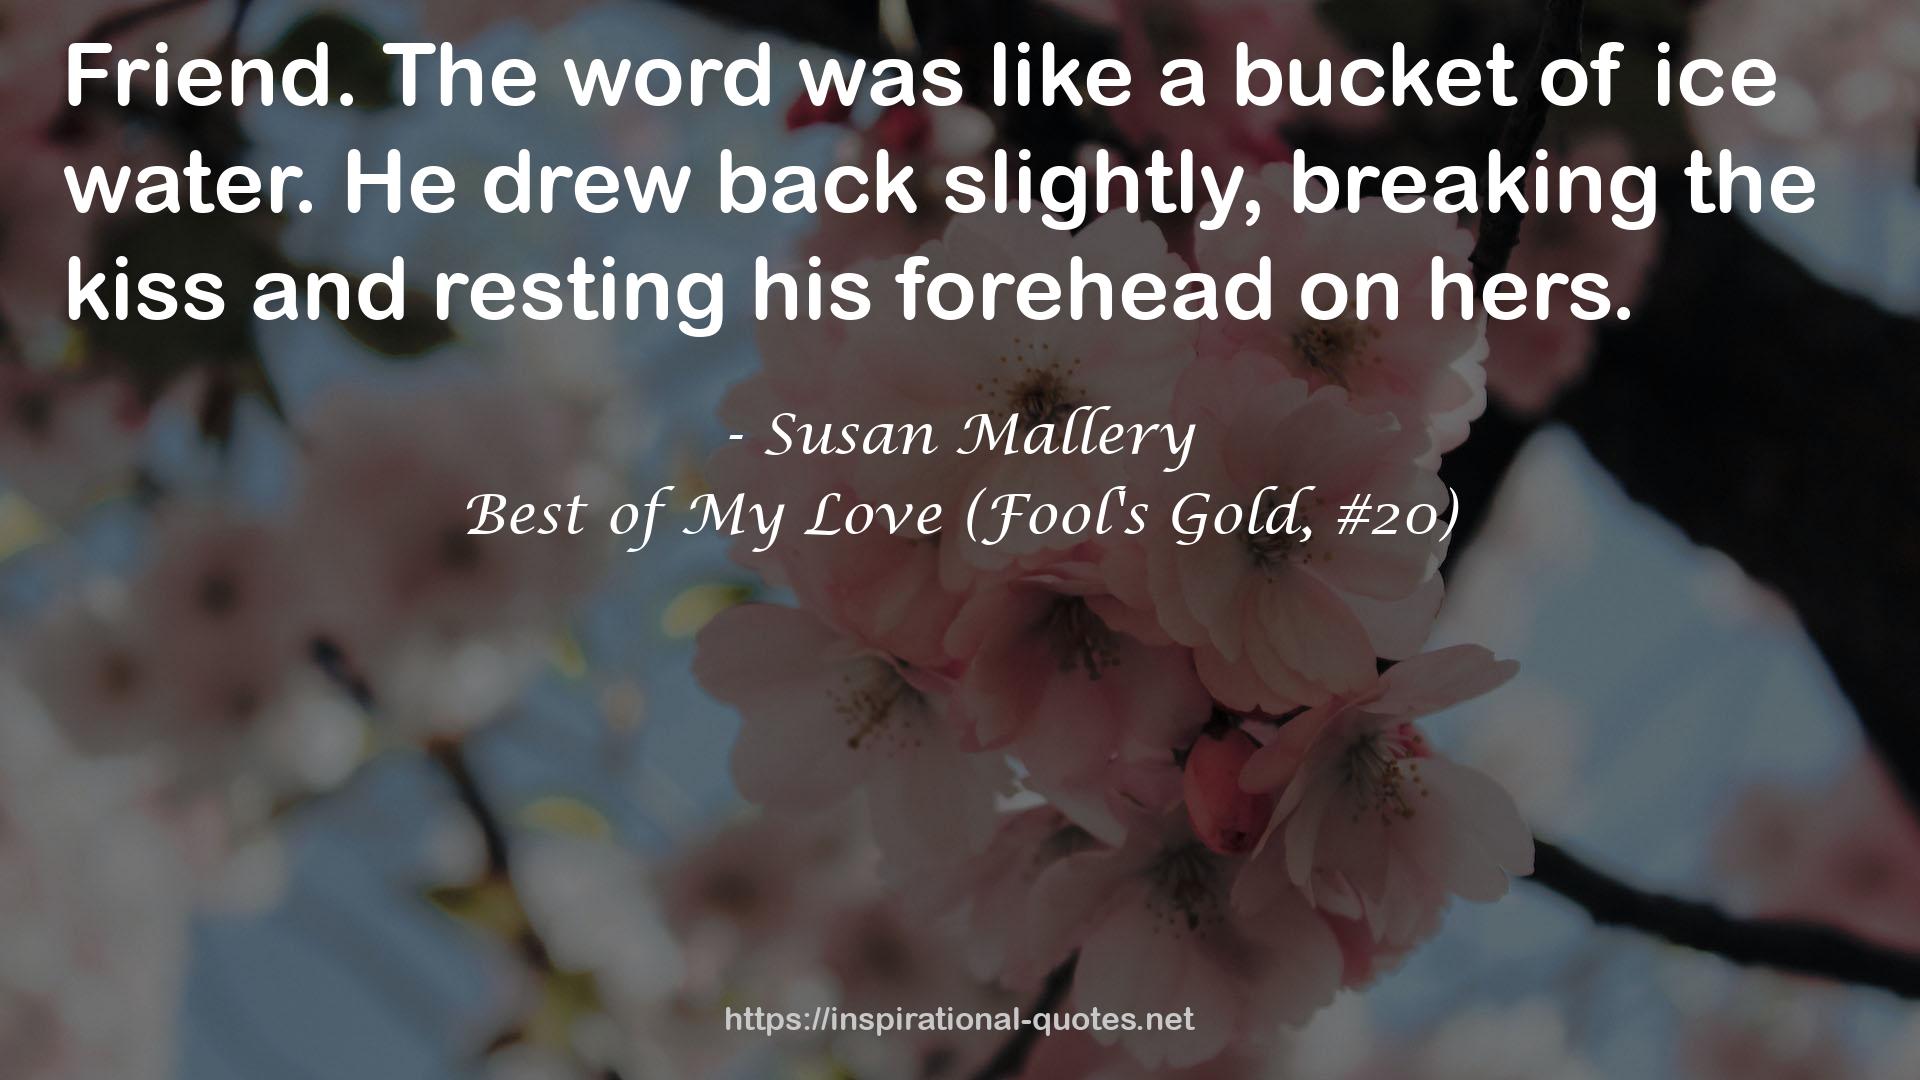 Best of My Love (Fool's Gold, #20) QUOTES